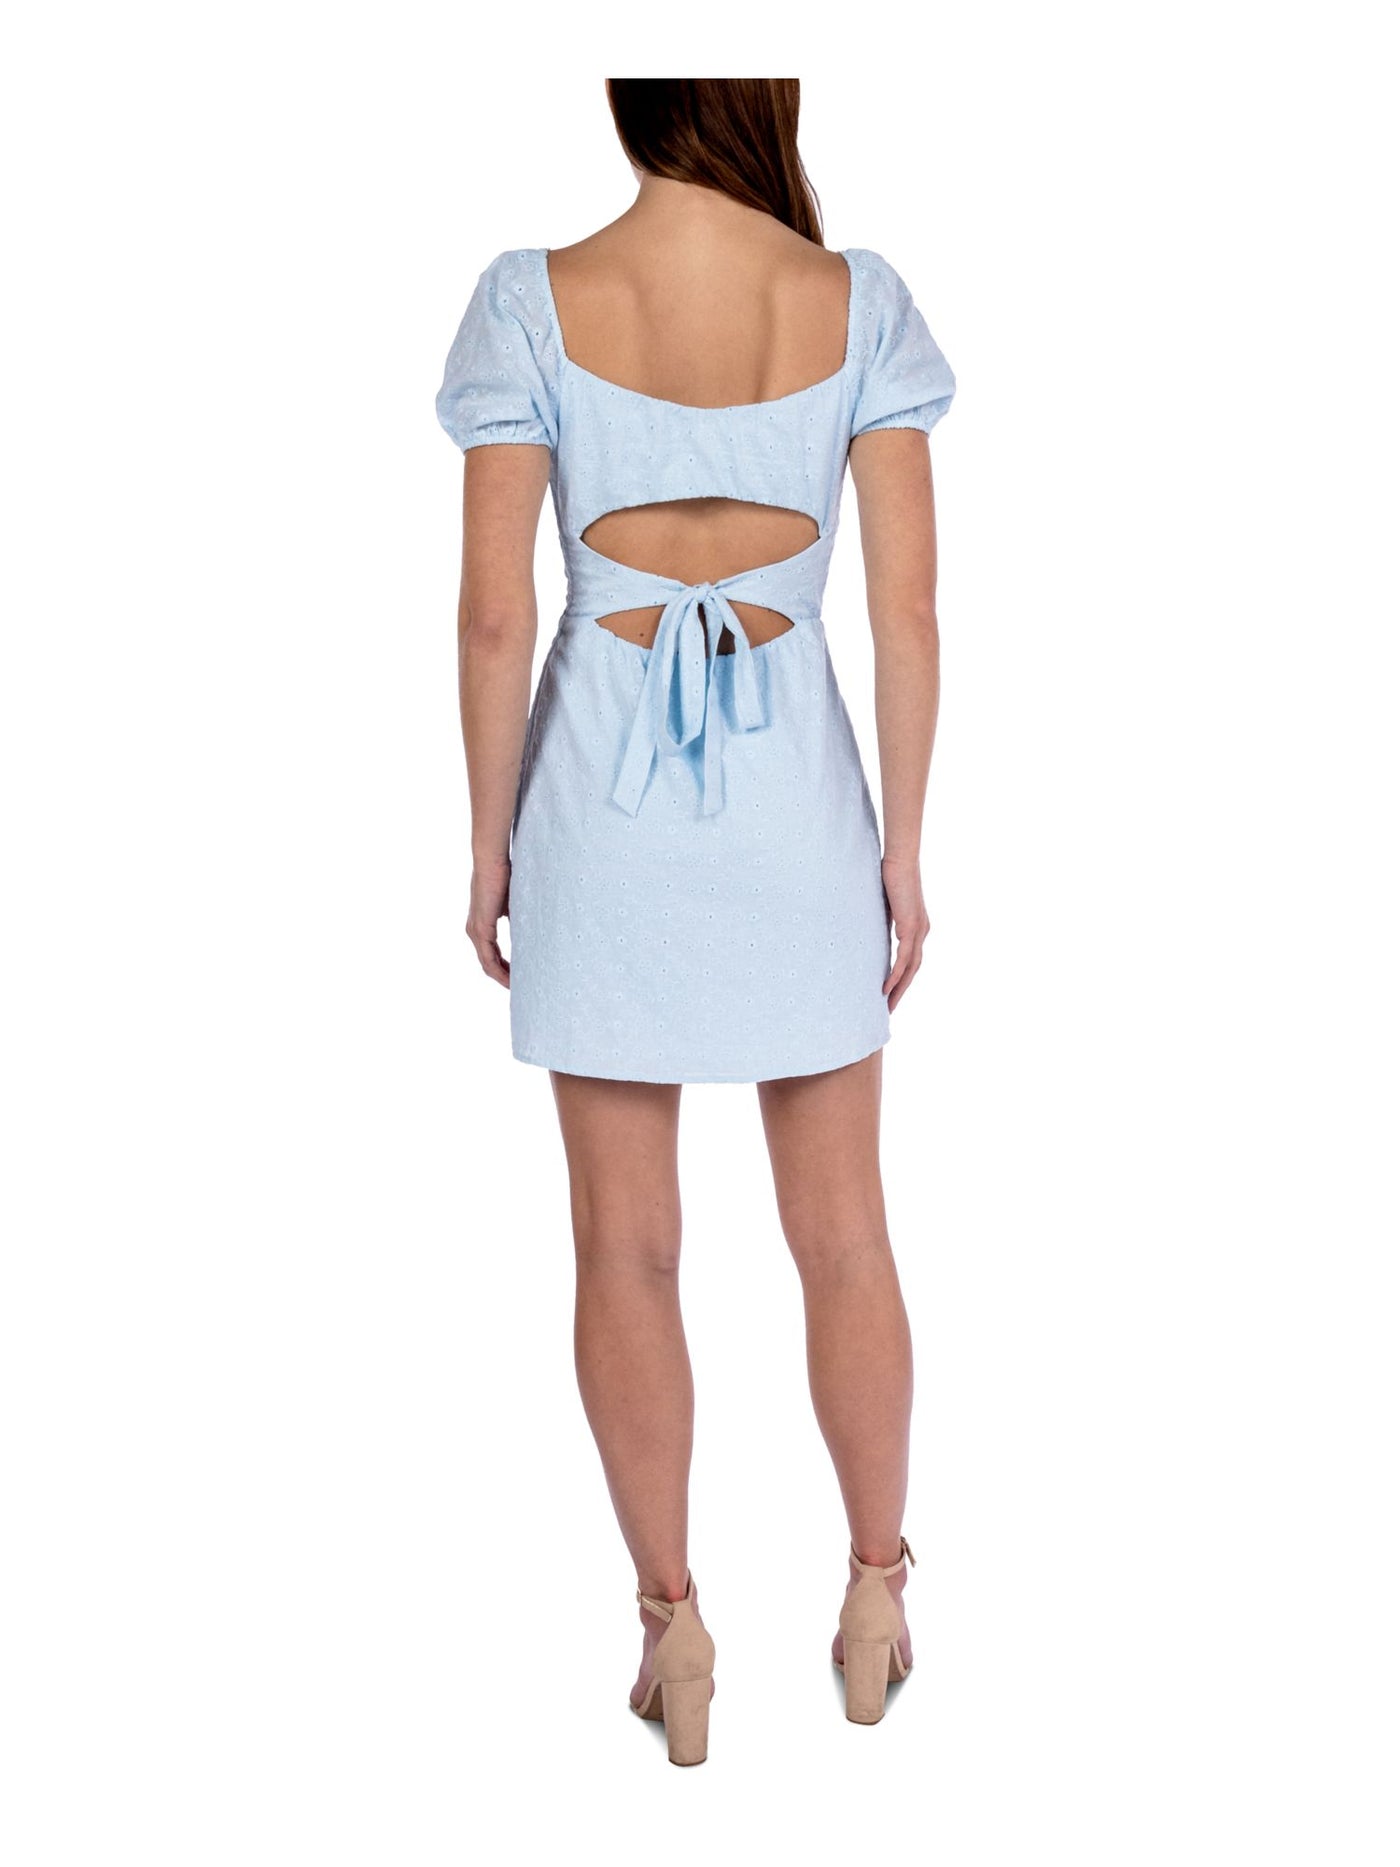 B DARLIN Womens Light Blue Zippered Cut Out Tie-back Lined Short Sleeve Square Neck Mini Party Fit + Flare Dress Juniors 13\14